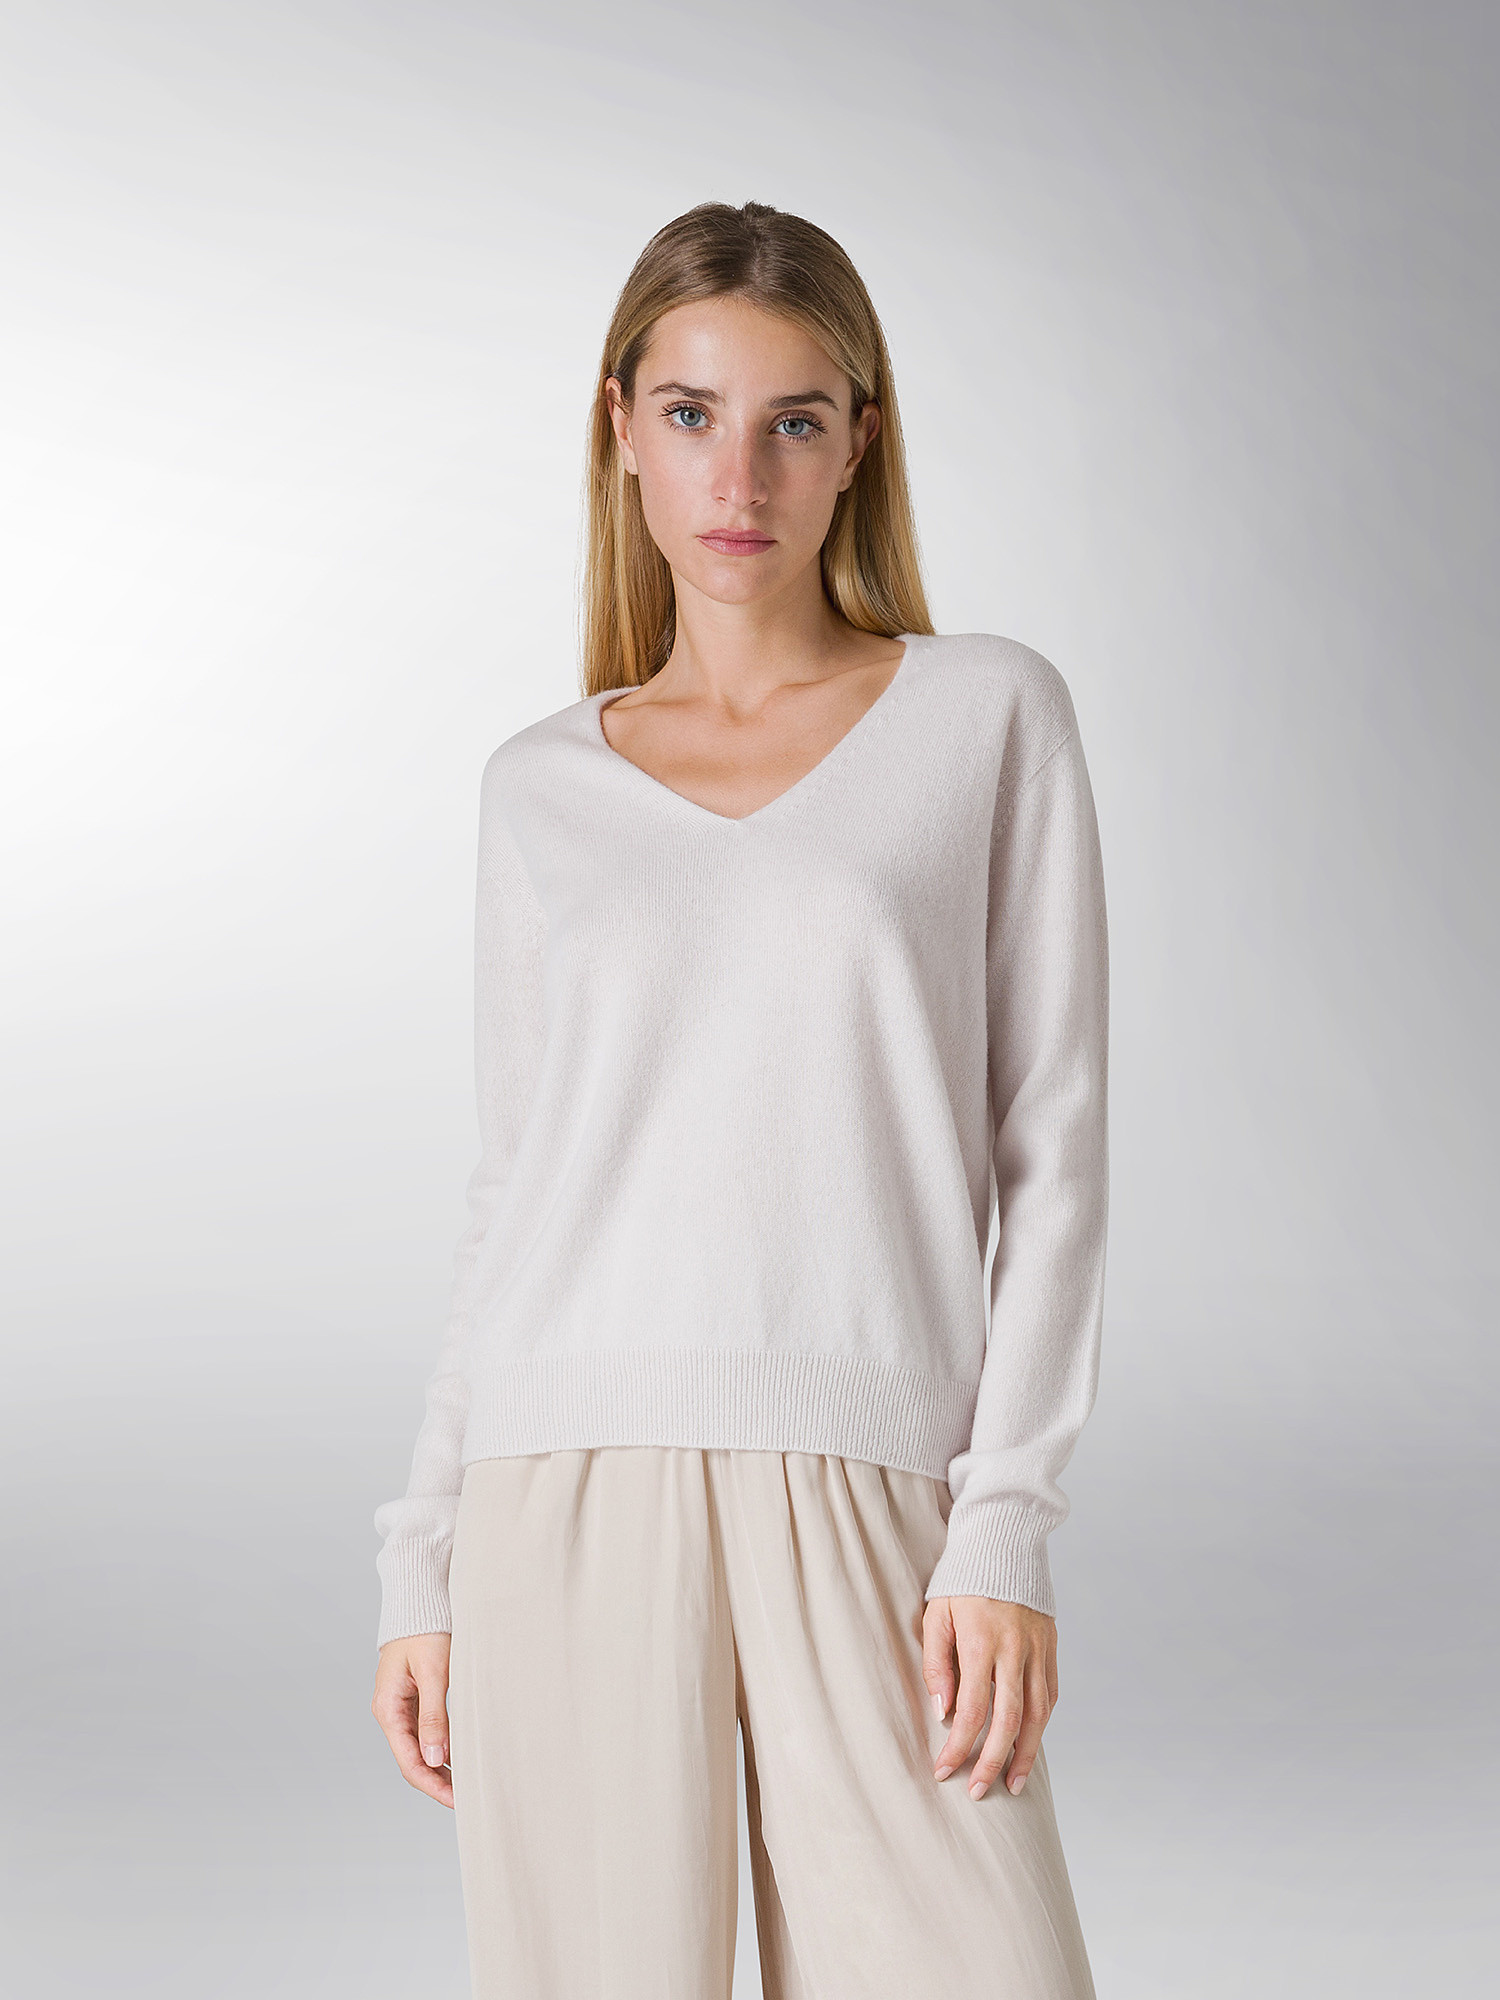 Coin Cashmere - V-neck sweater in pure premium cashmere, White, large image number 1